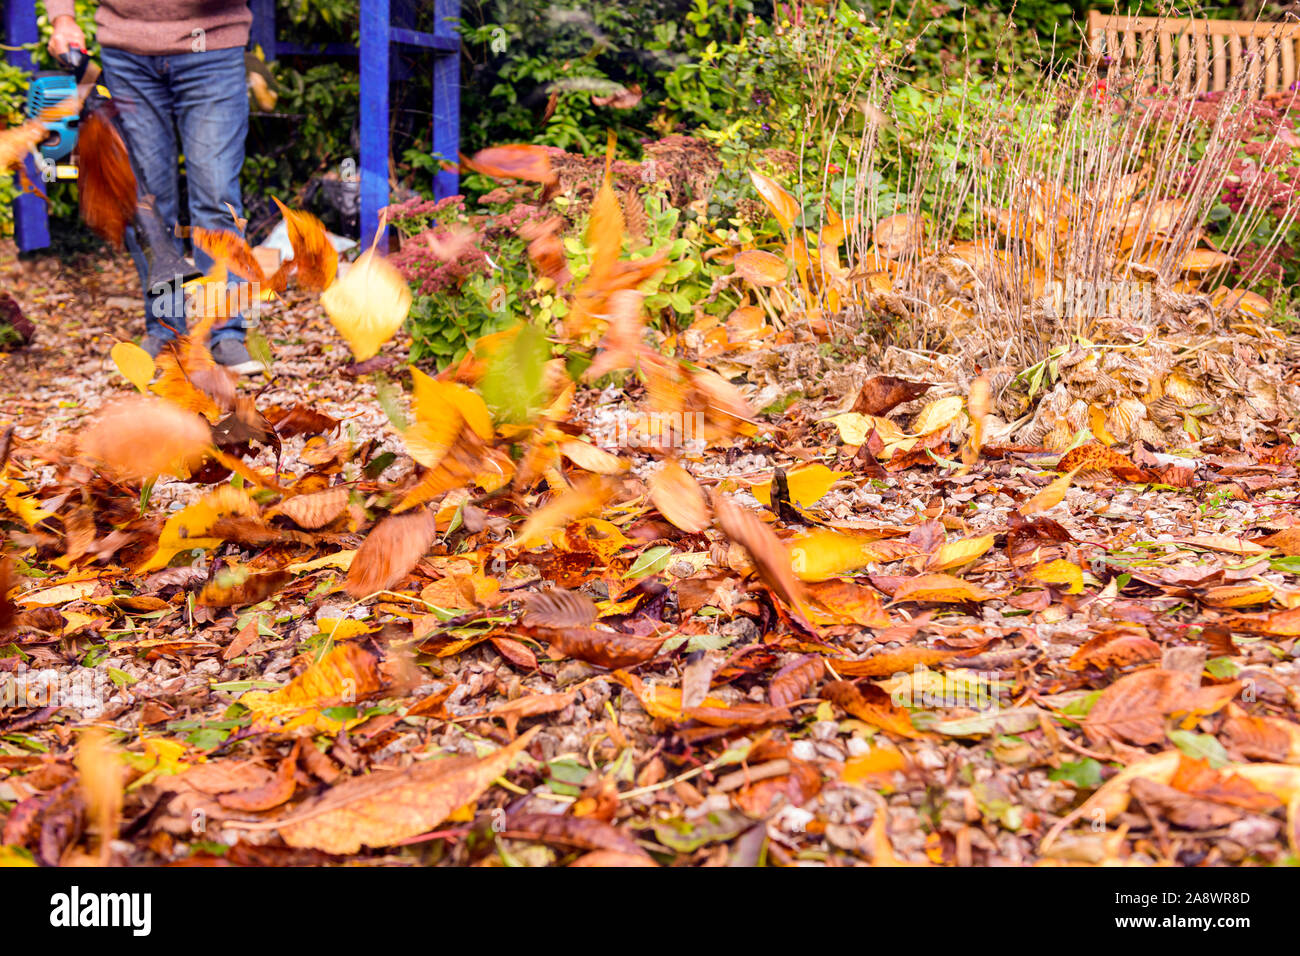 Gardener using petrol blower blowing and clearing autumn fall leaves from garden yard path pathway Stock Photo